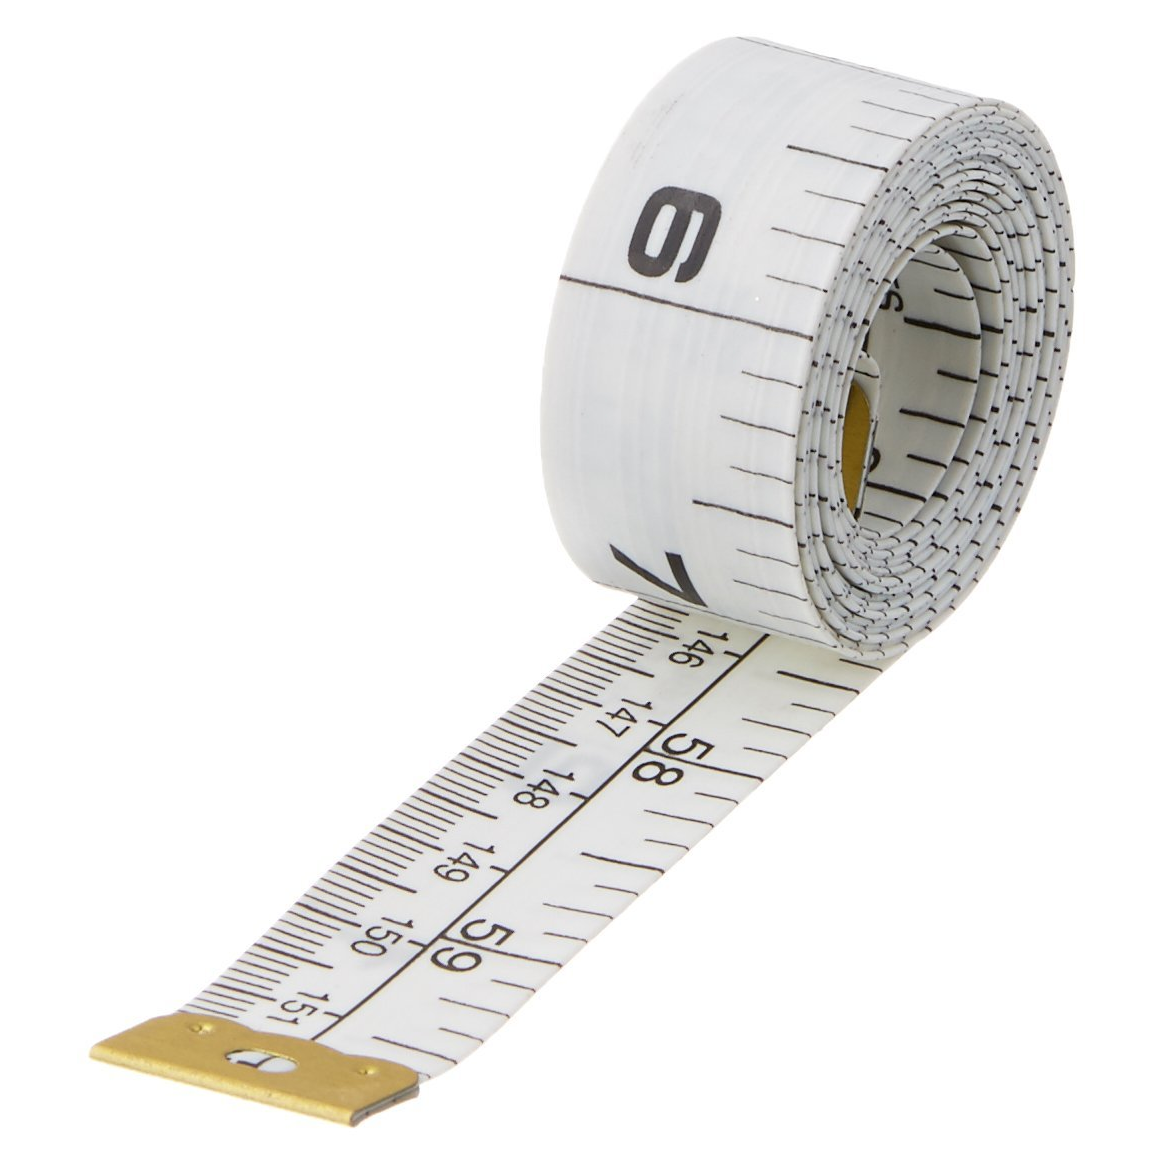 5ft Double Sided Tailors Tape Measure (36 pc Display)